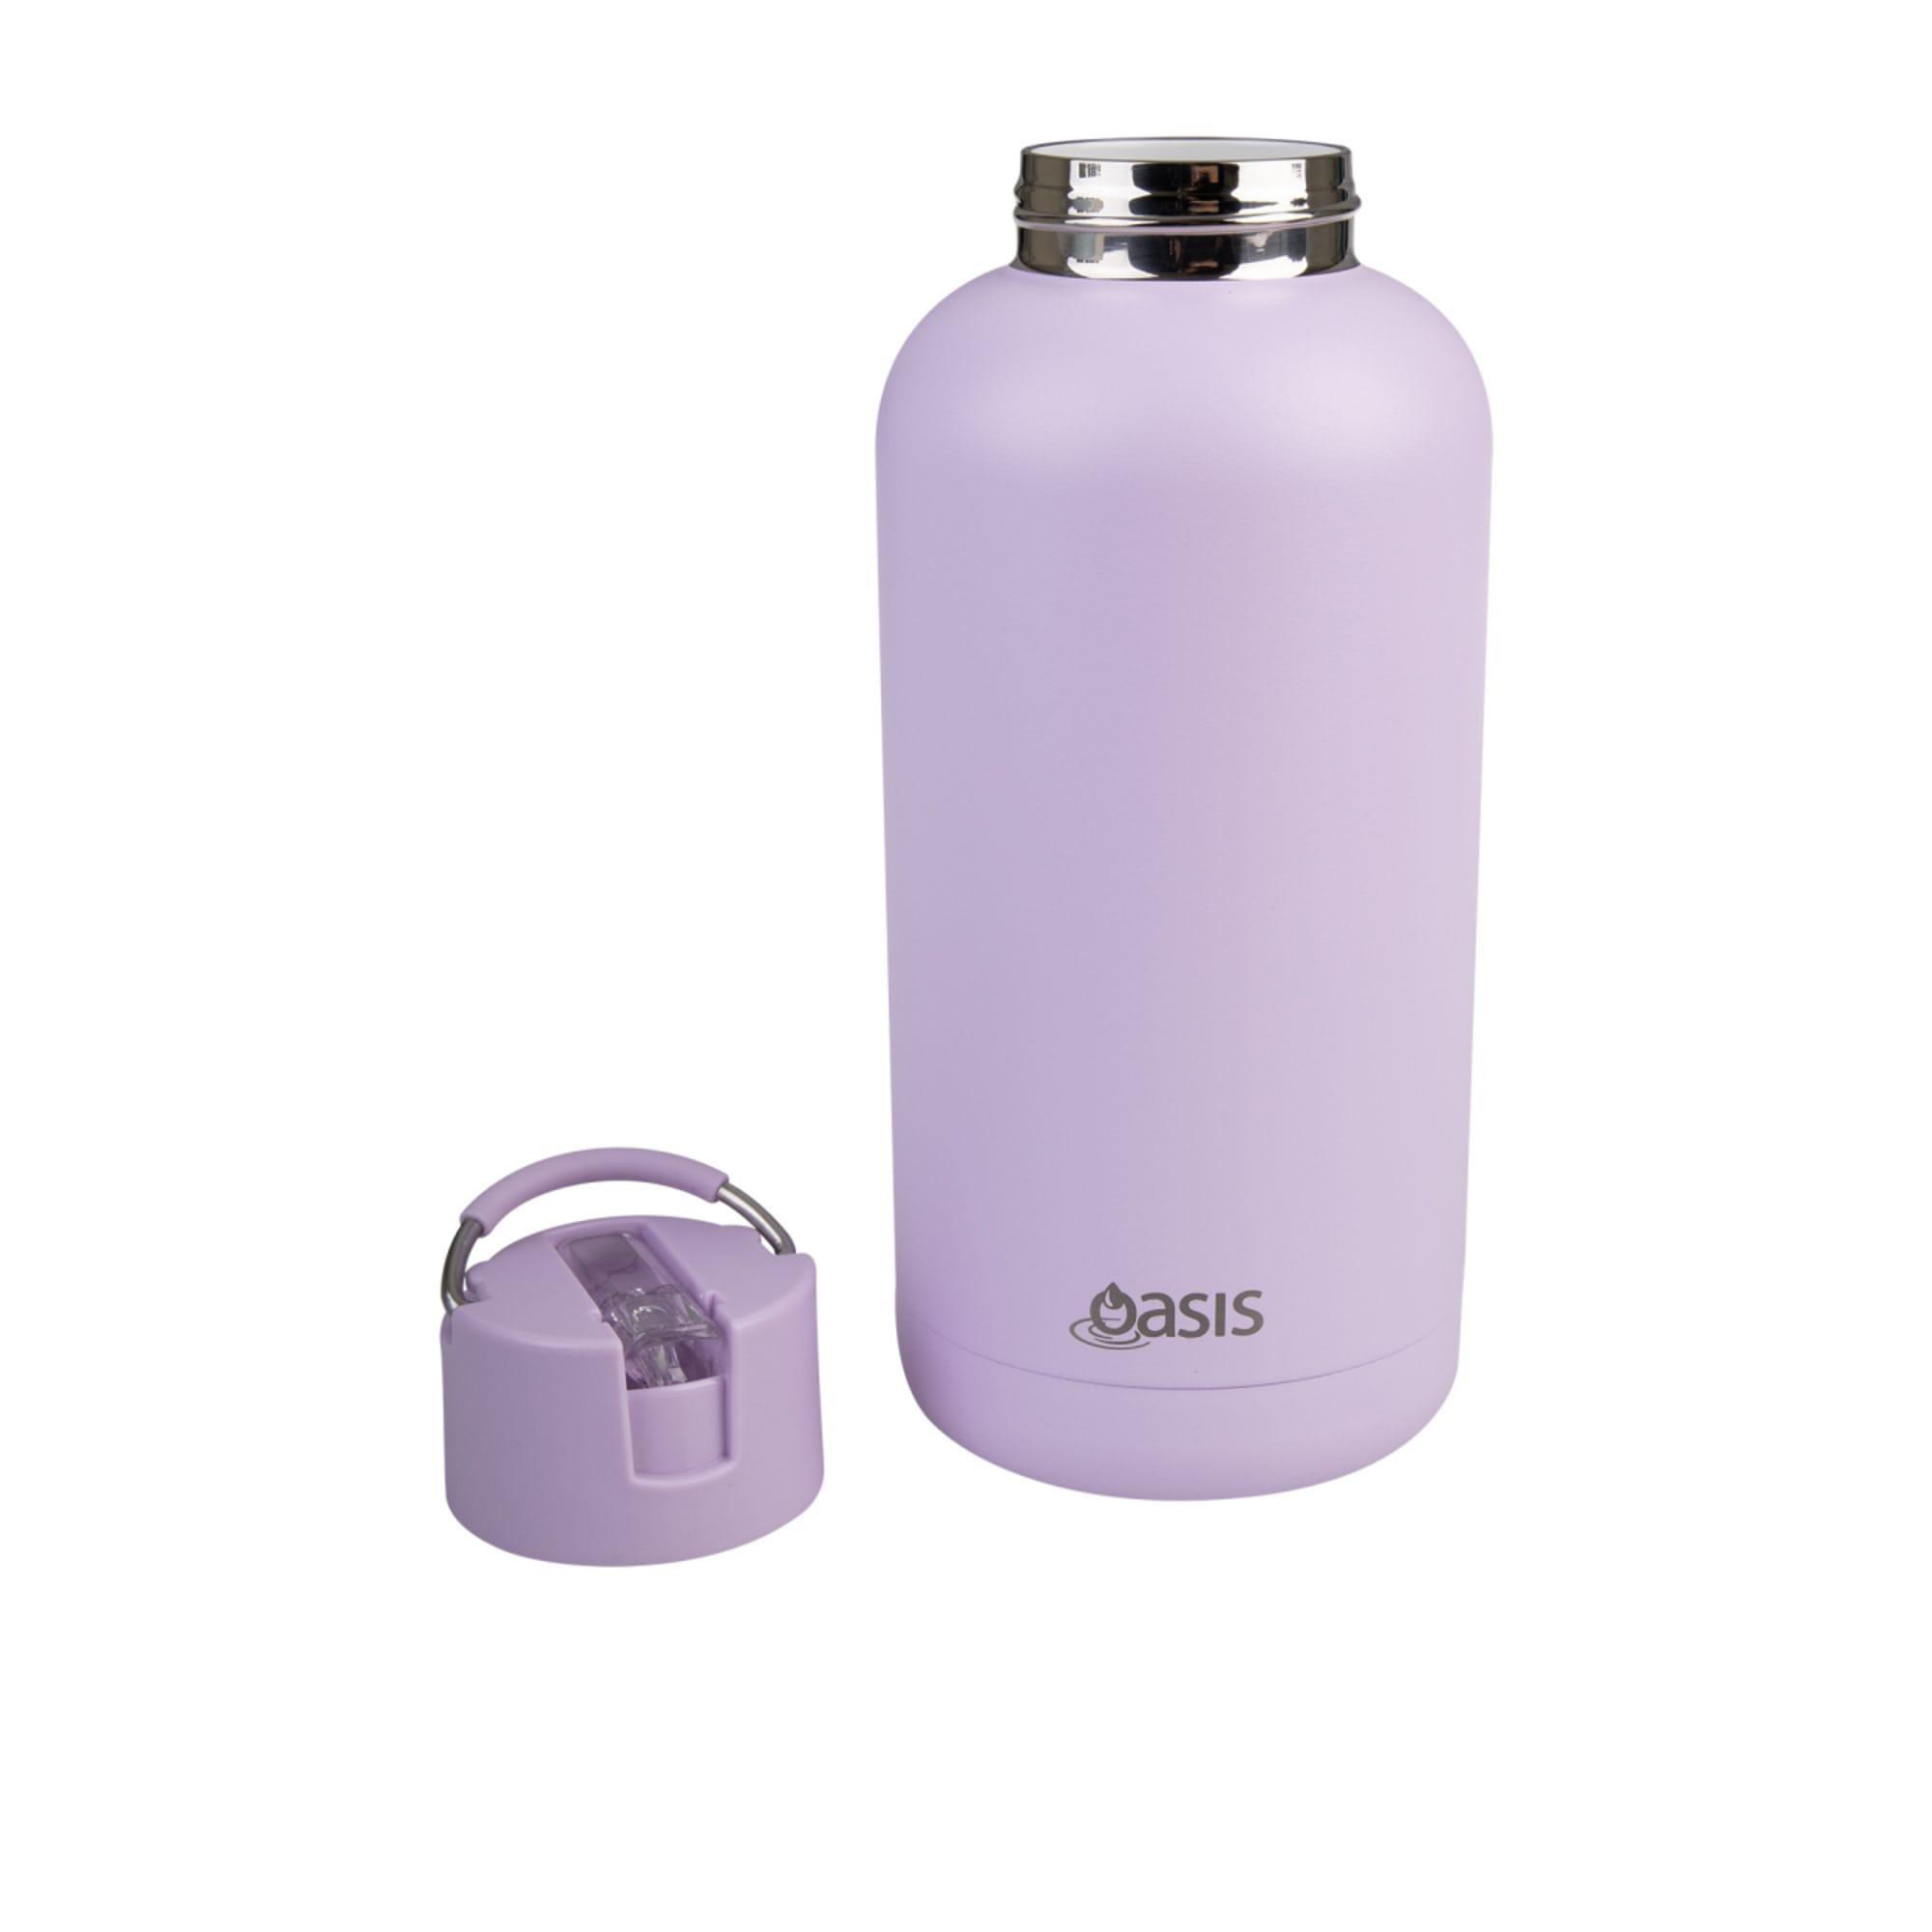 Oasis Moda Triple Wall Insulated Drink Bottle 1.5L Orchid Image 3